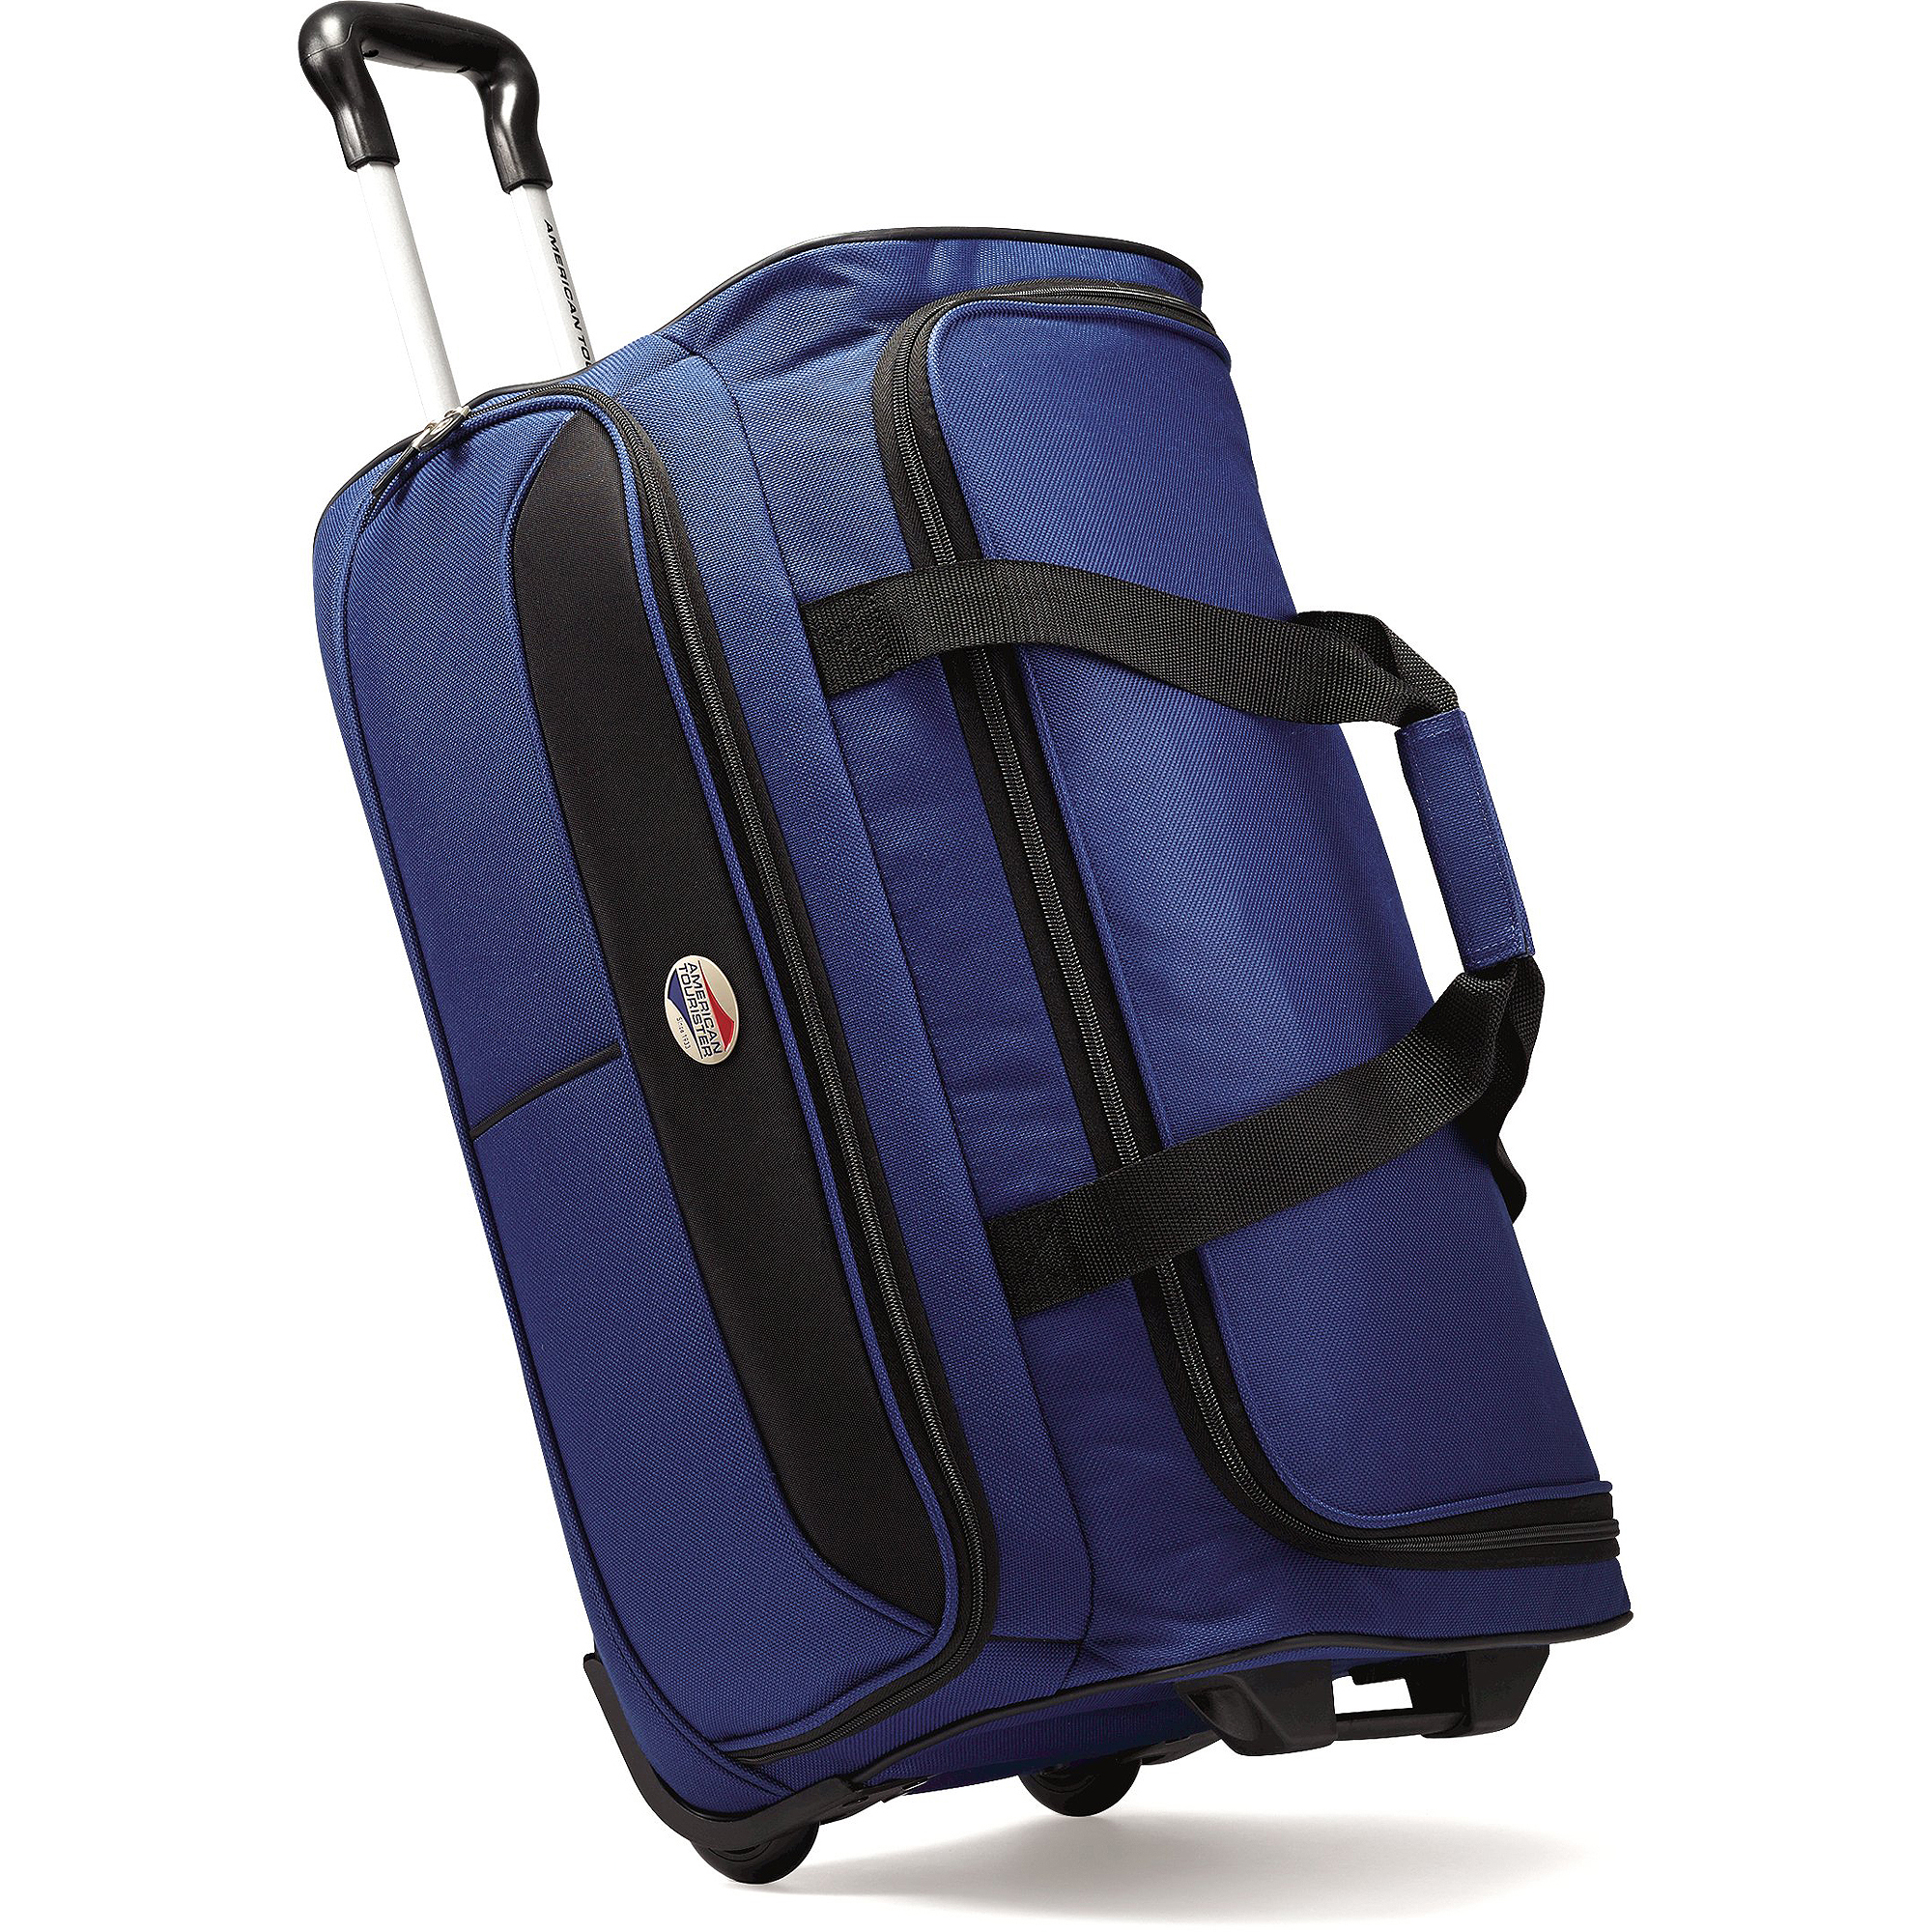 American Tourister 4-Piece Luggage Set - image 3 of 7